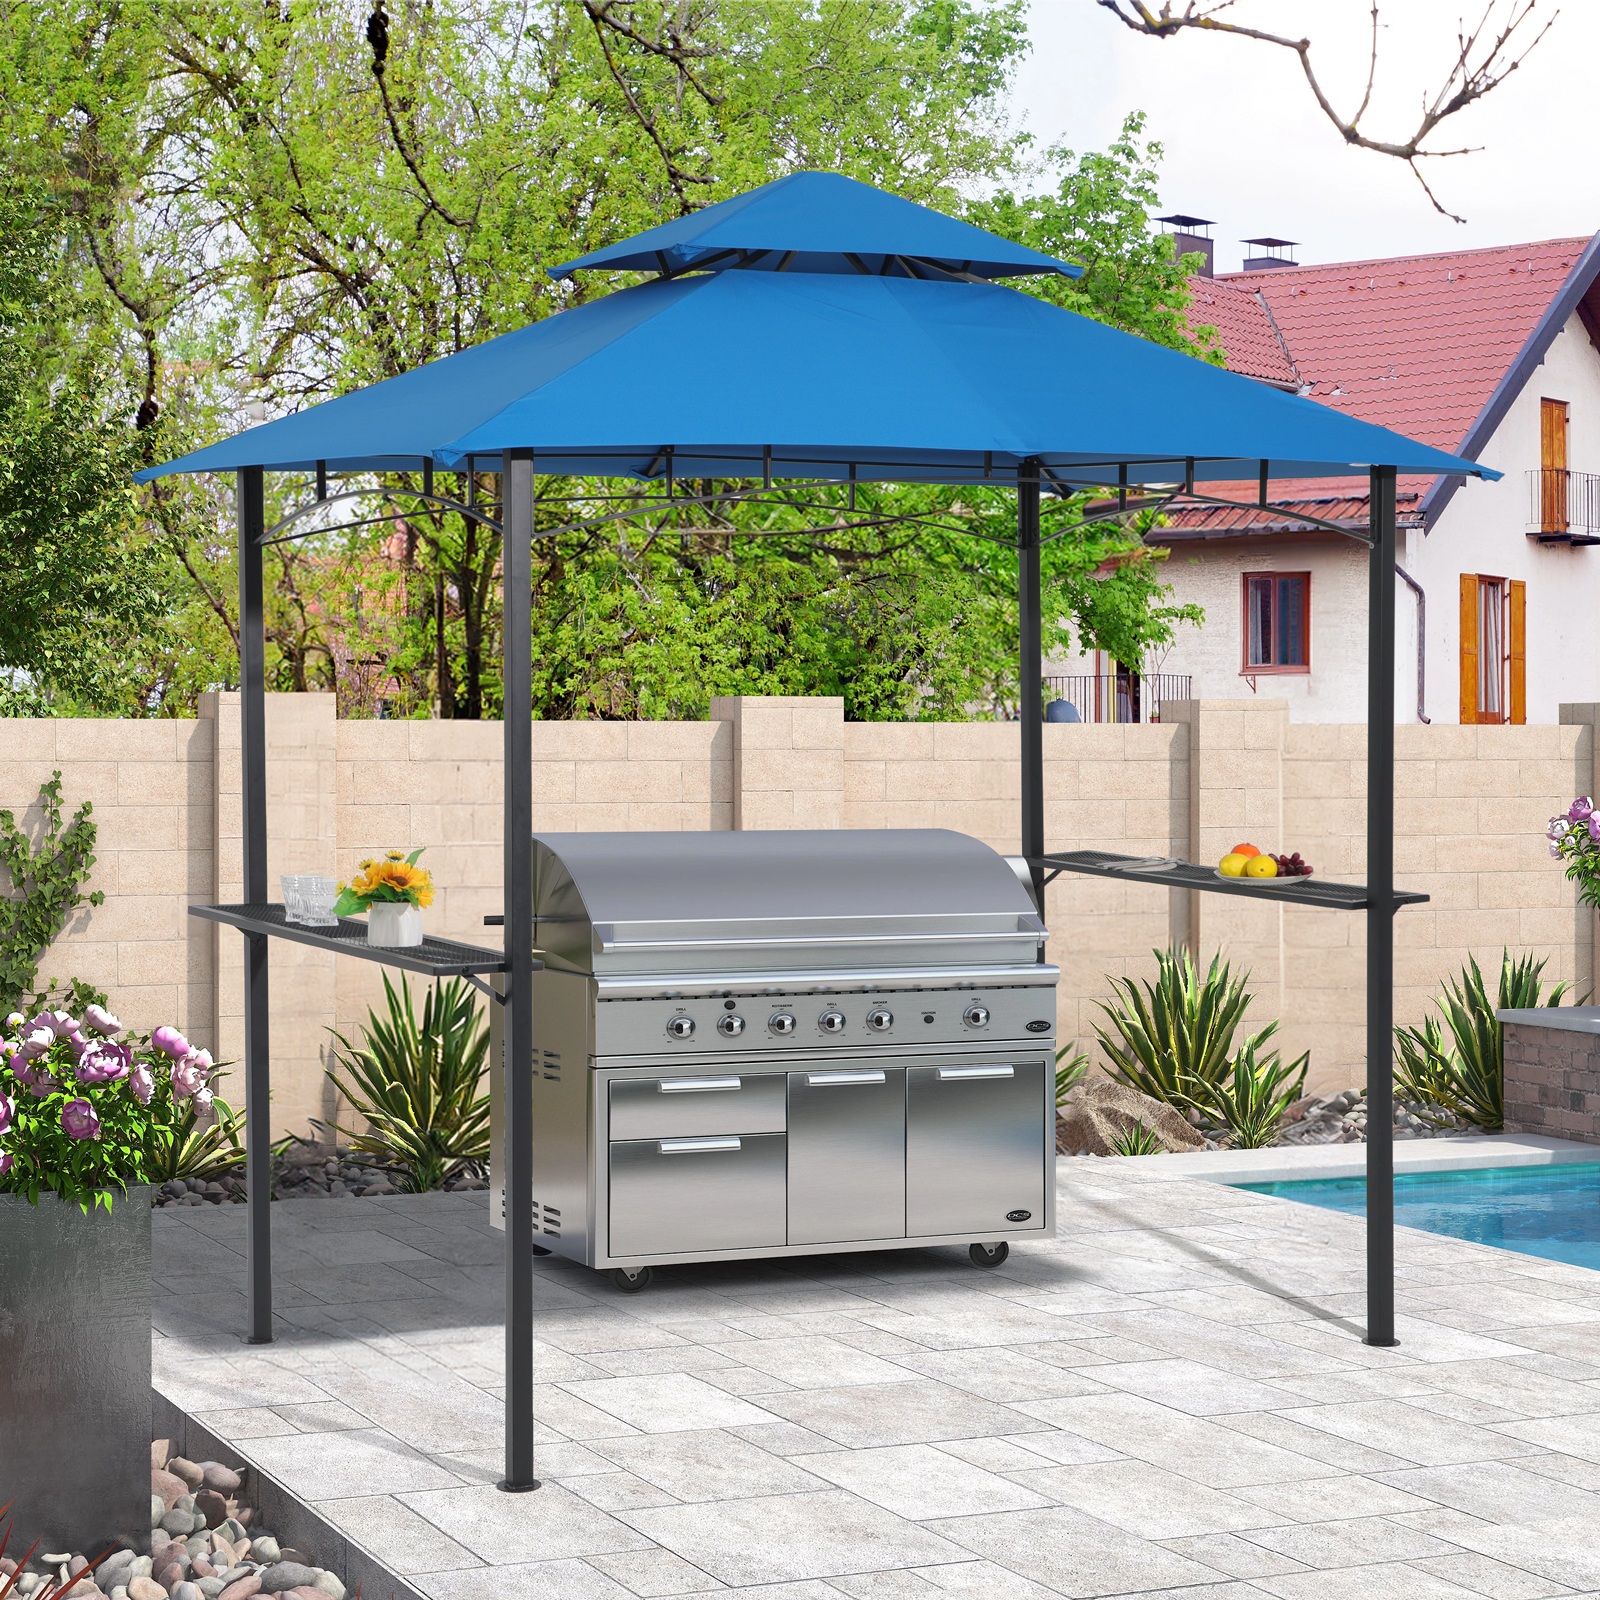 8' by 5' Metal Grill Gazebo with Double-Tier Soft Polyester Top, Beige